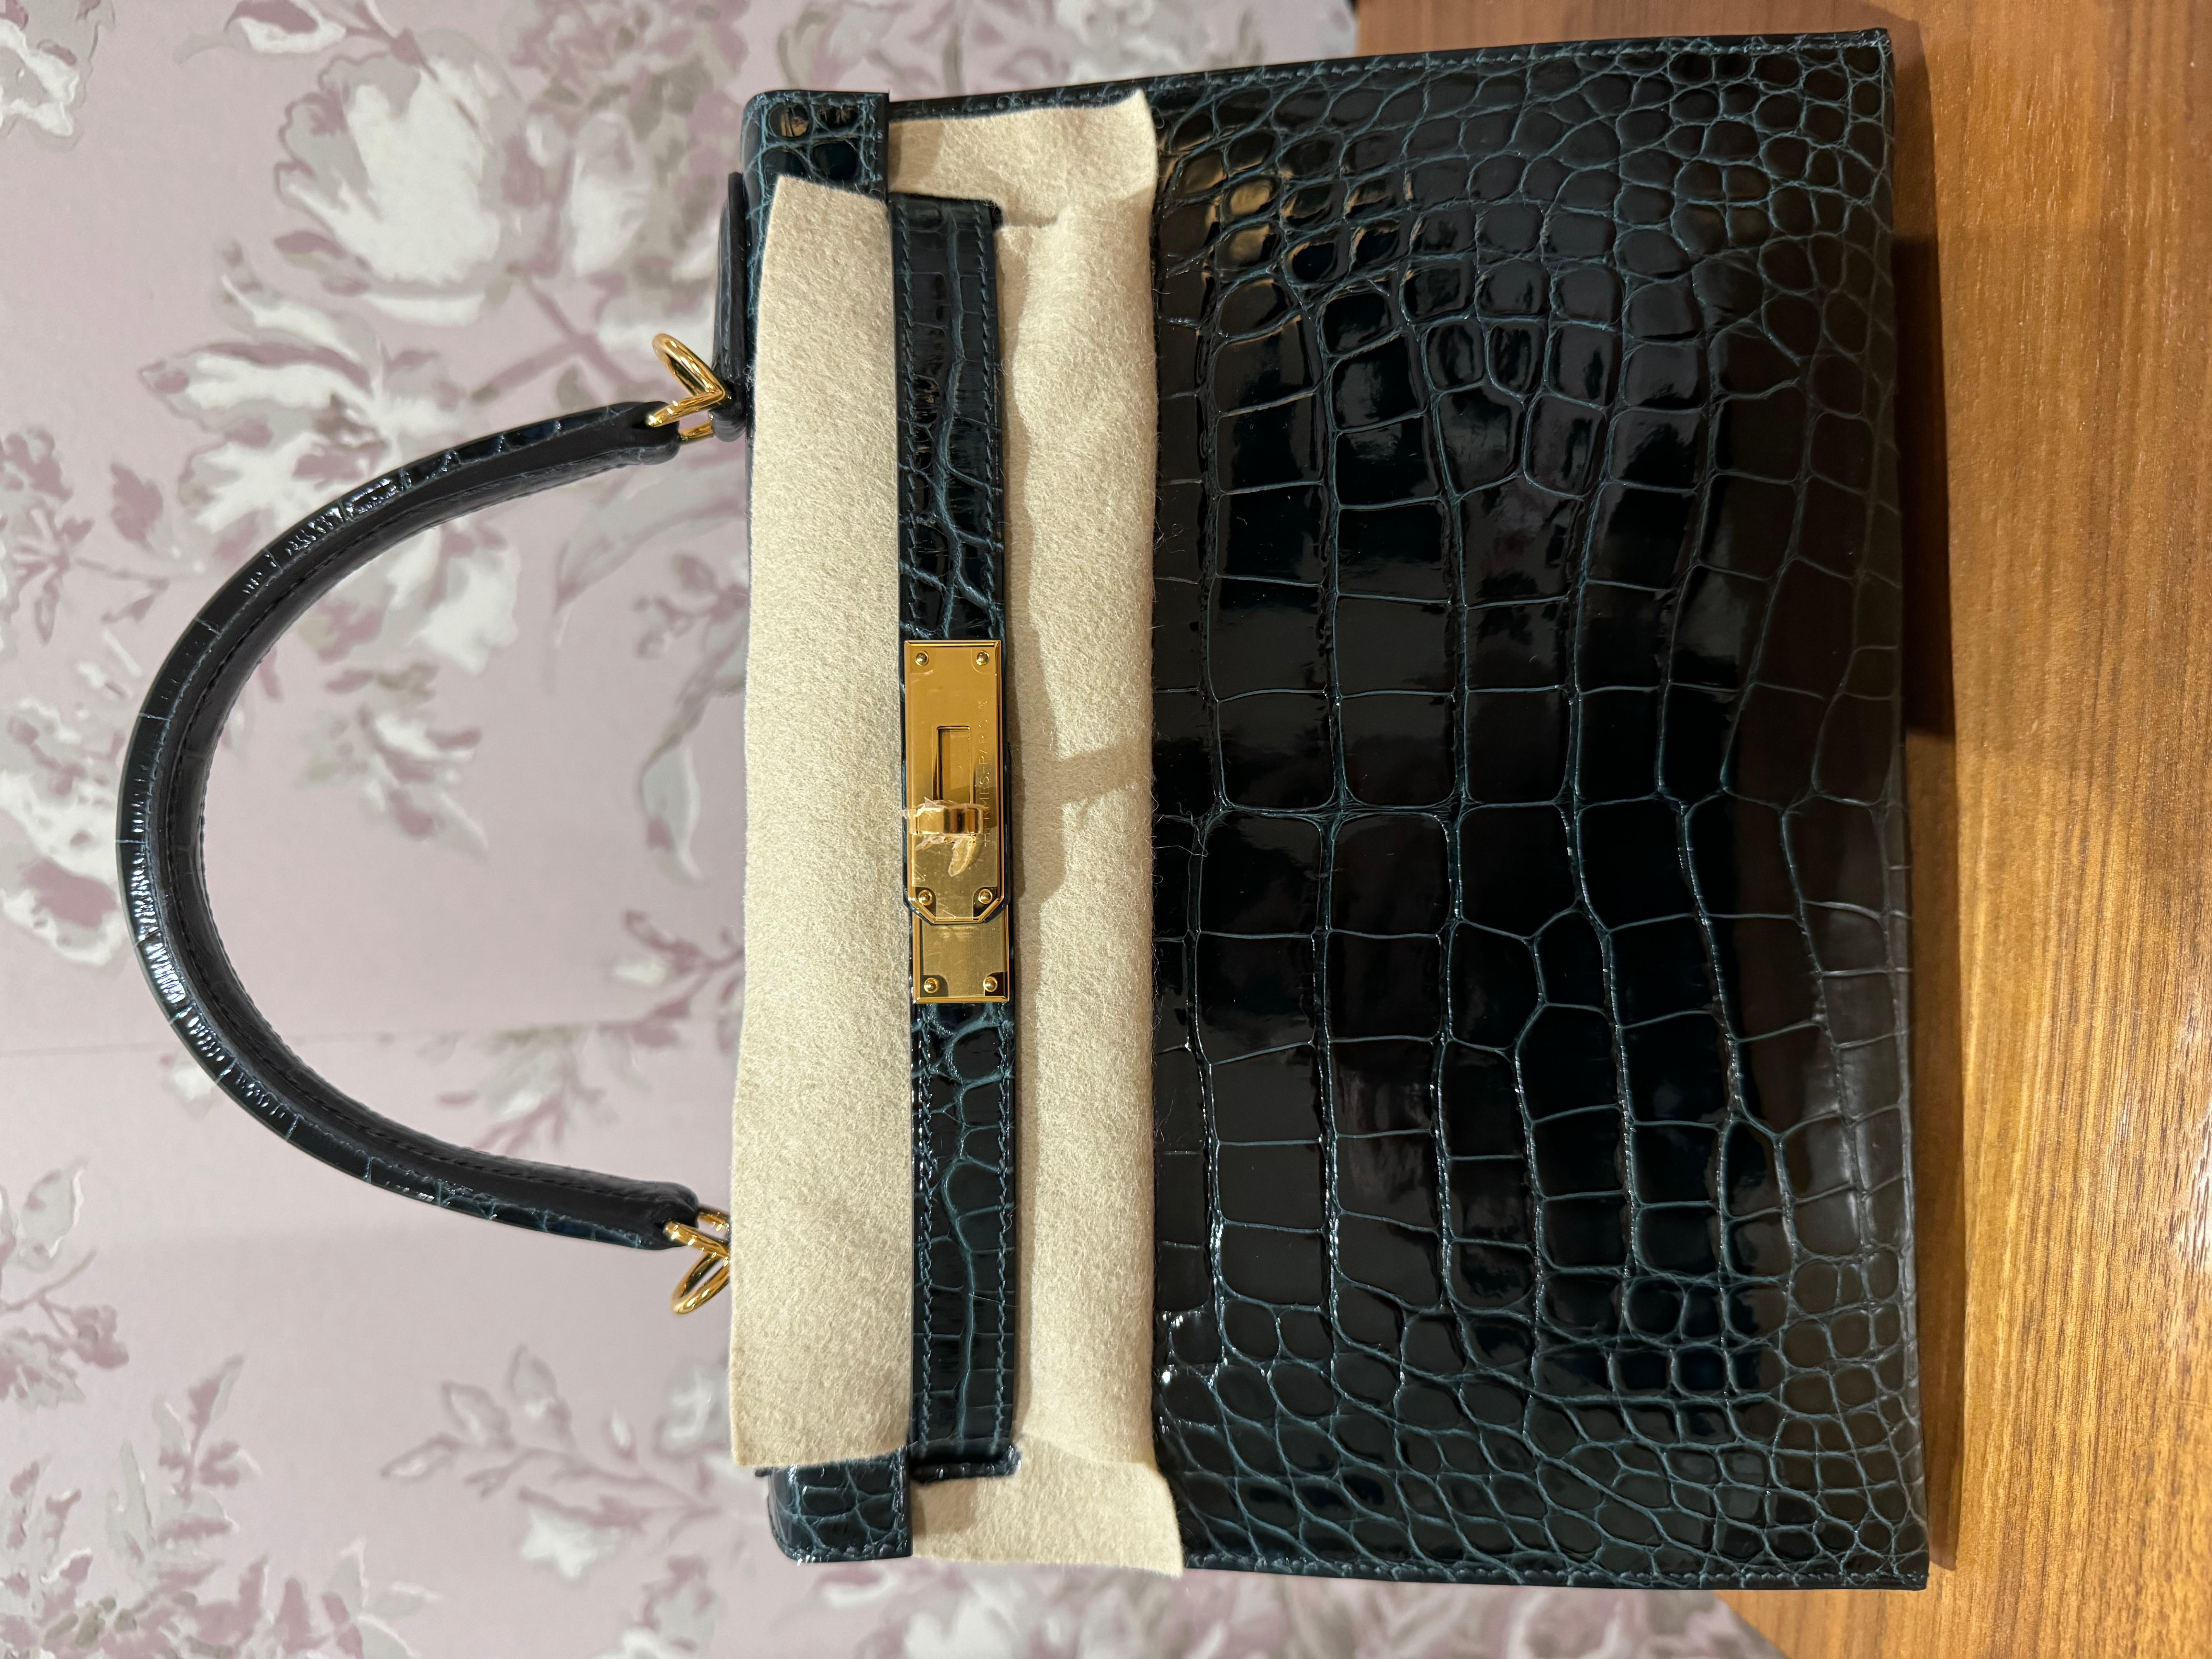 Hermes Kelly 28 Shiny Alligator in Vert Cypres colour and gold hardware. This bag is a statement piece; creates a classic and sophisticated look for a lady. The deep green colour has an emerald depth and a darker undertone for a timeless presence.